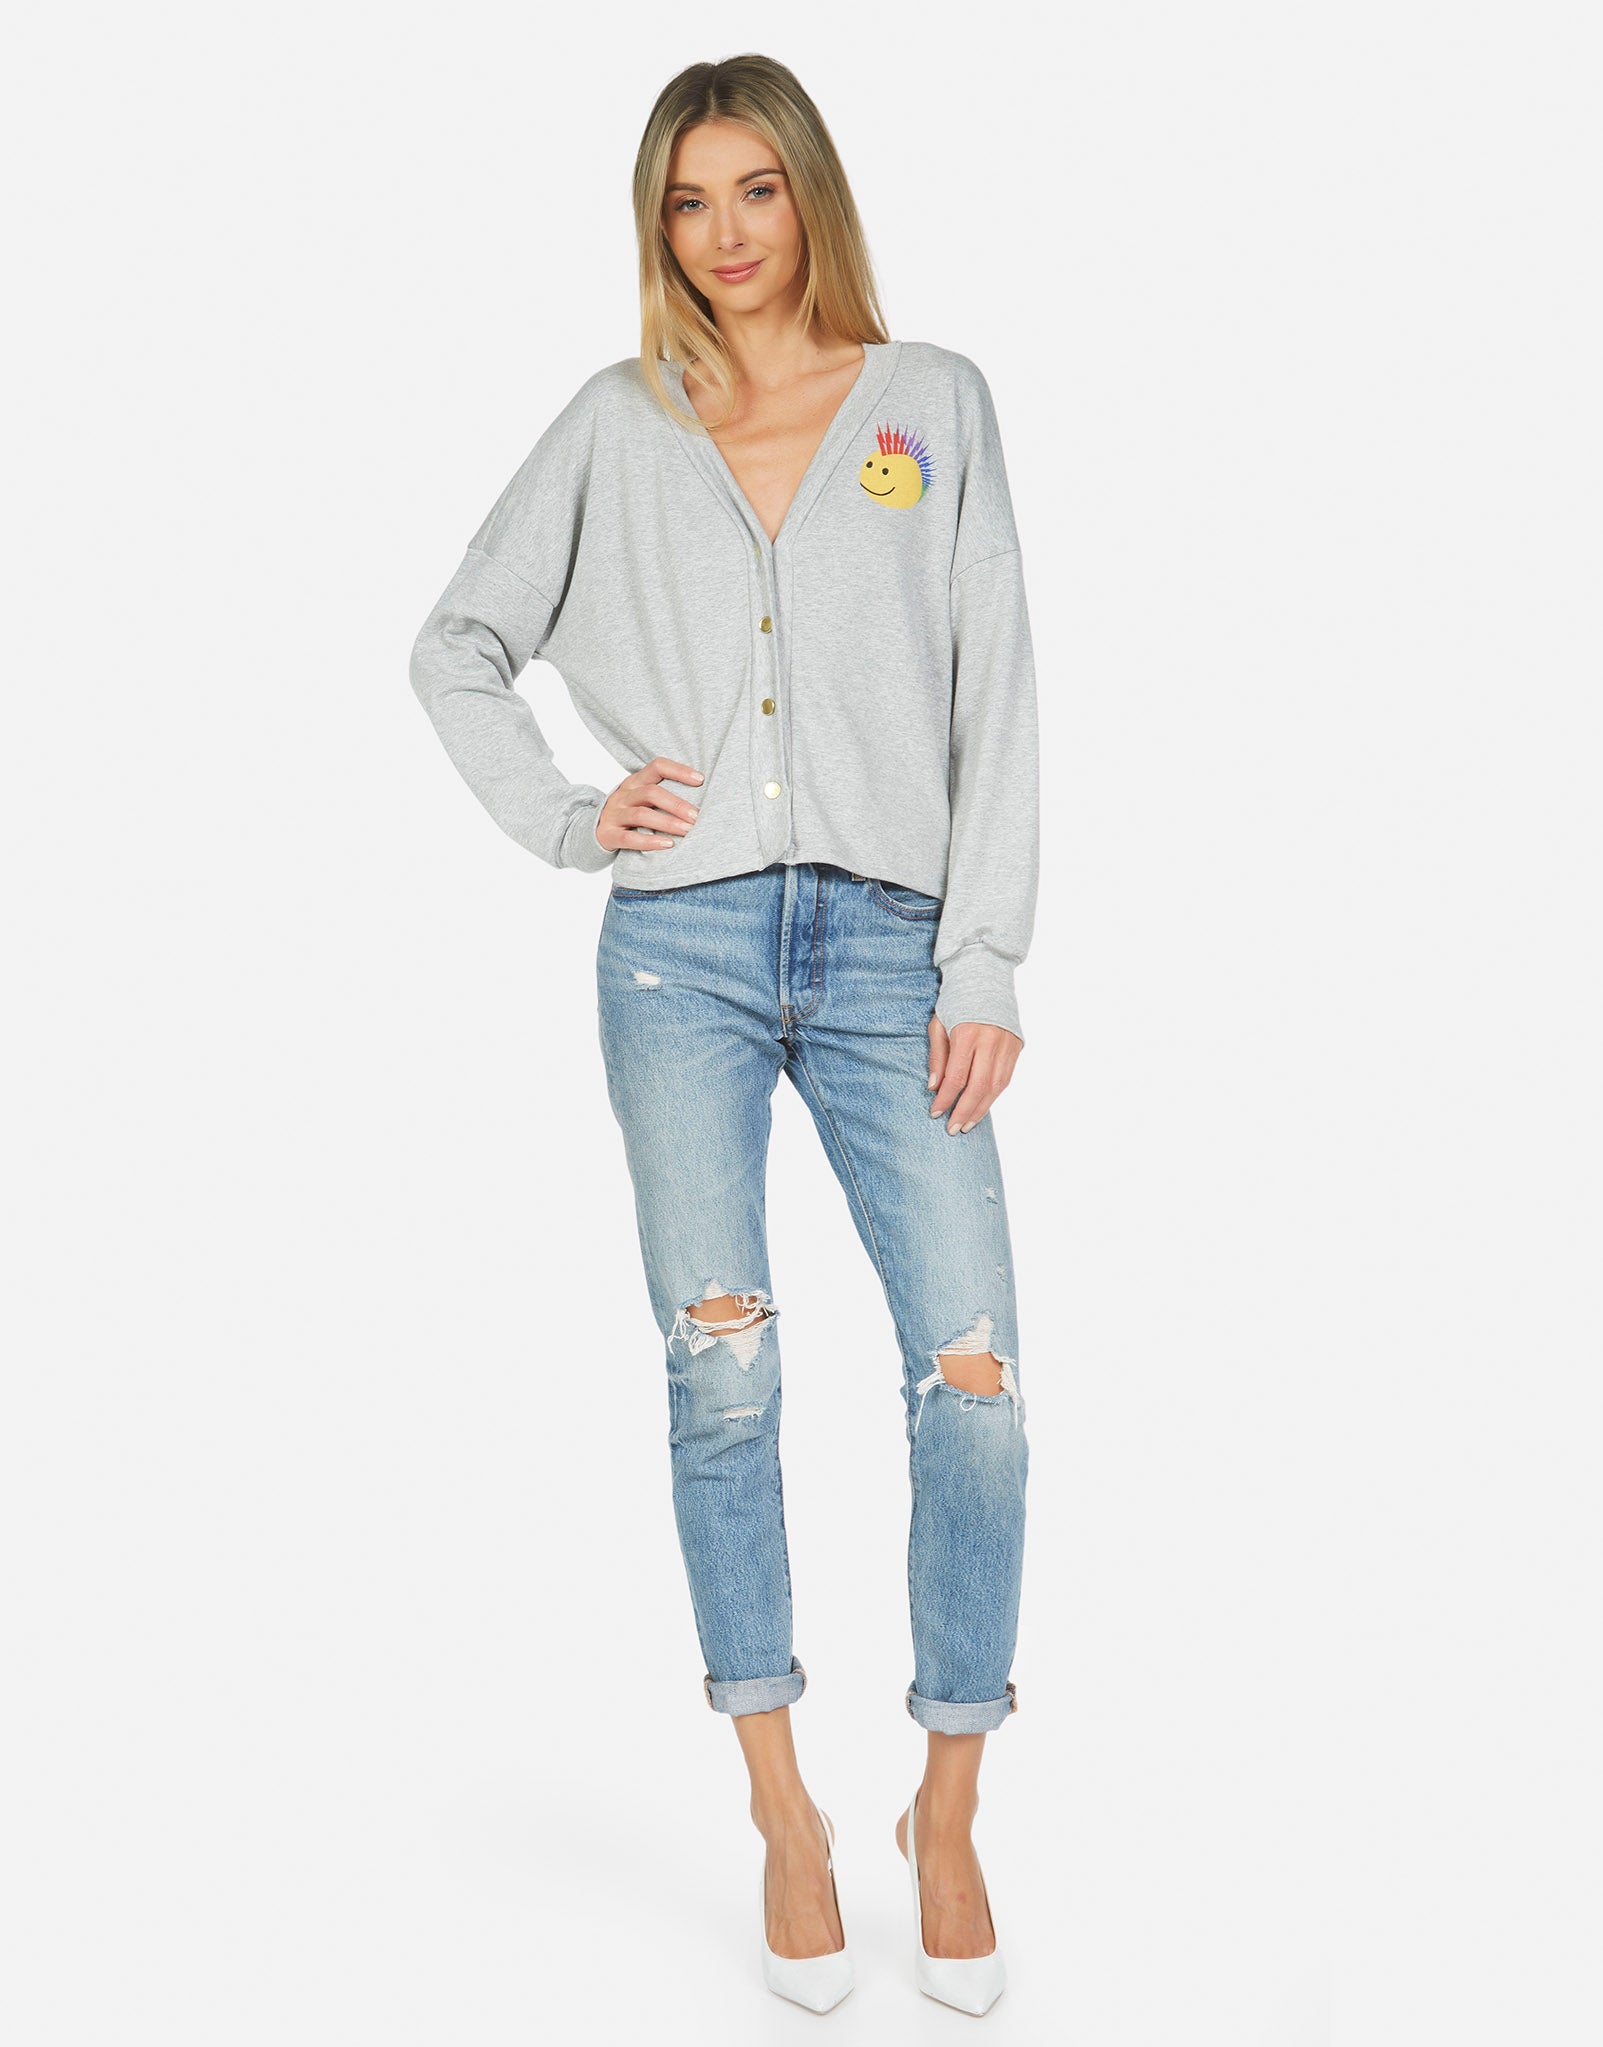 light grey cardigan with ripped jeans, pumps, blonde woman, and a mohawk smiley face